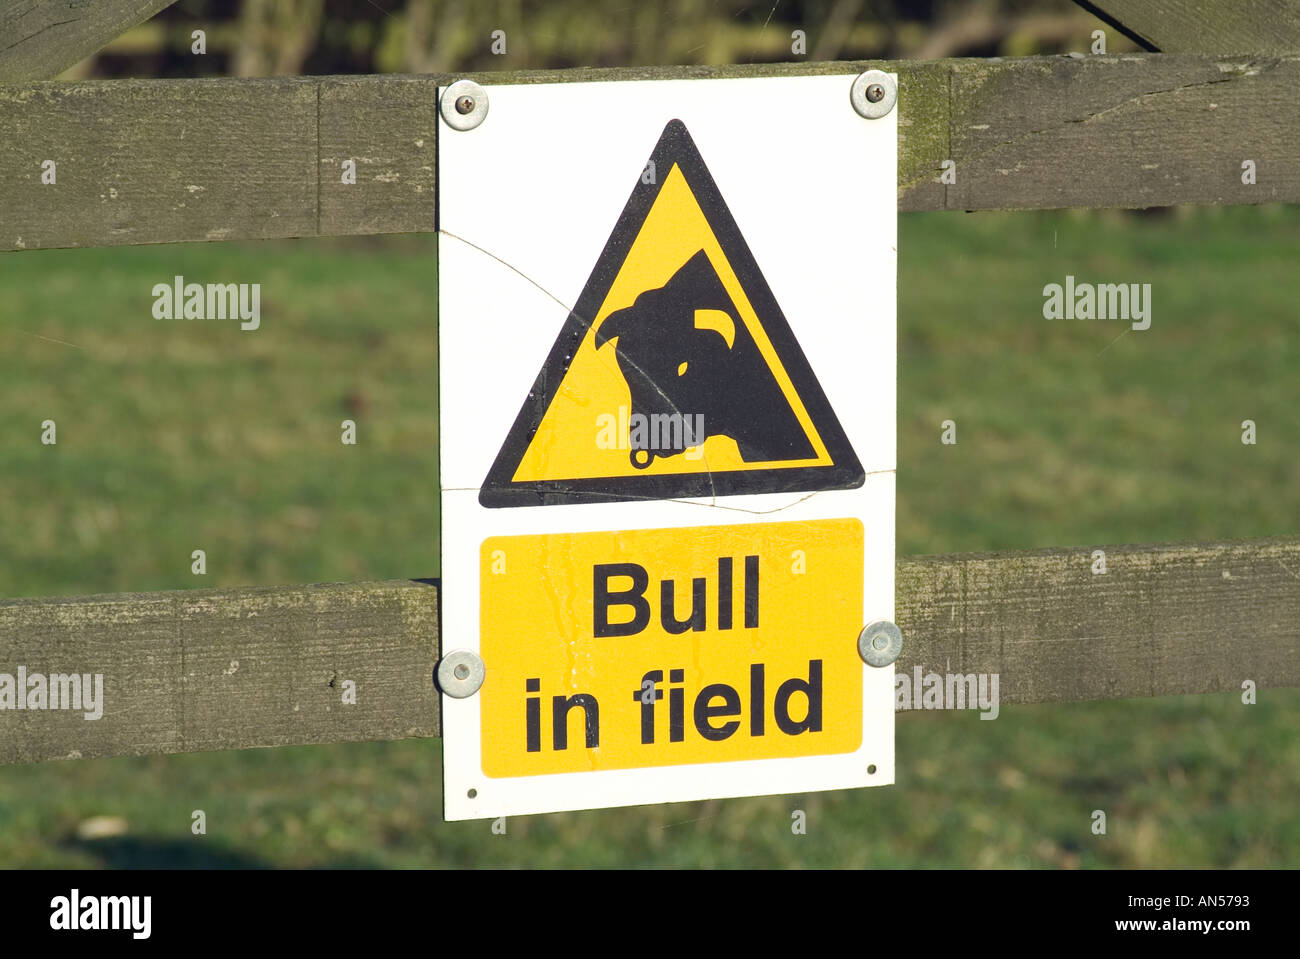 Bull in field sign clumsy crash bull in a china shop Stock Photo